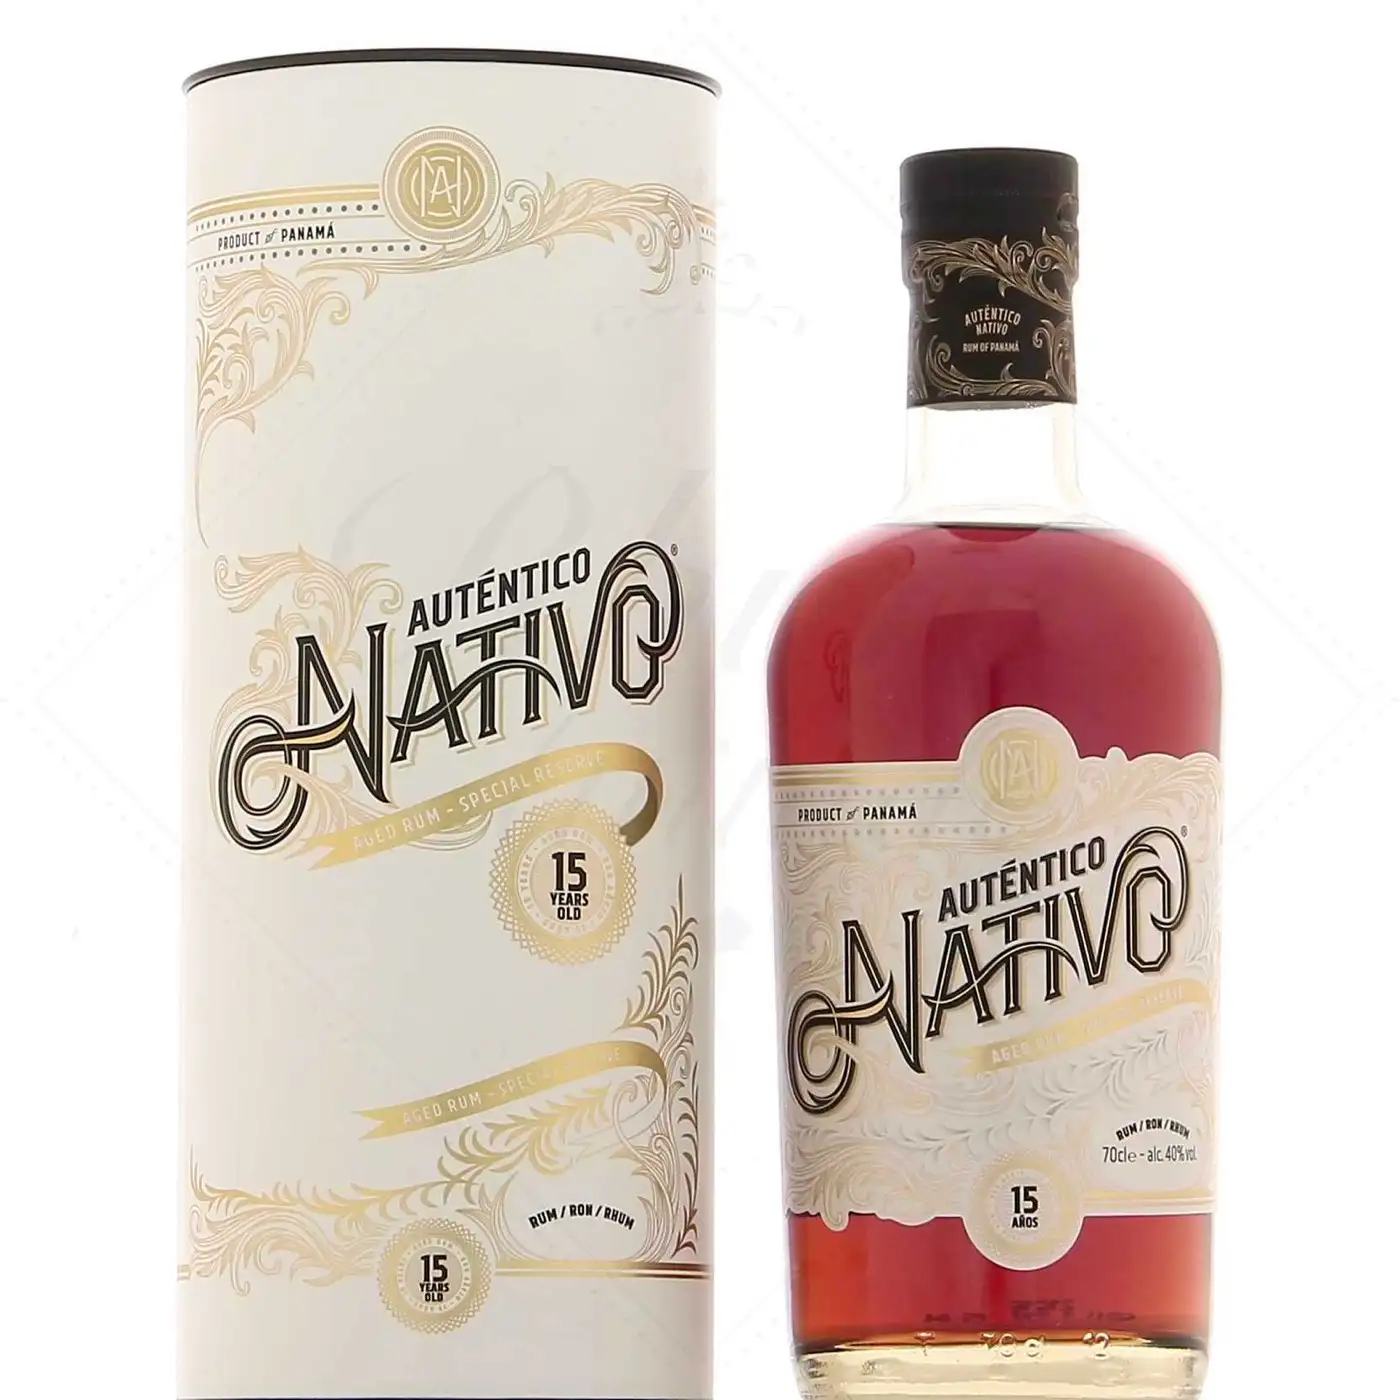 Image of the front of the bottle of the rum Auténtico Nativo 15 Años